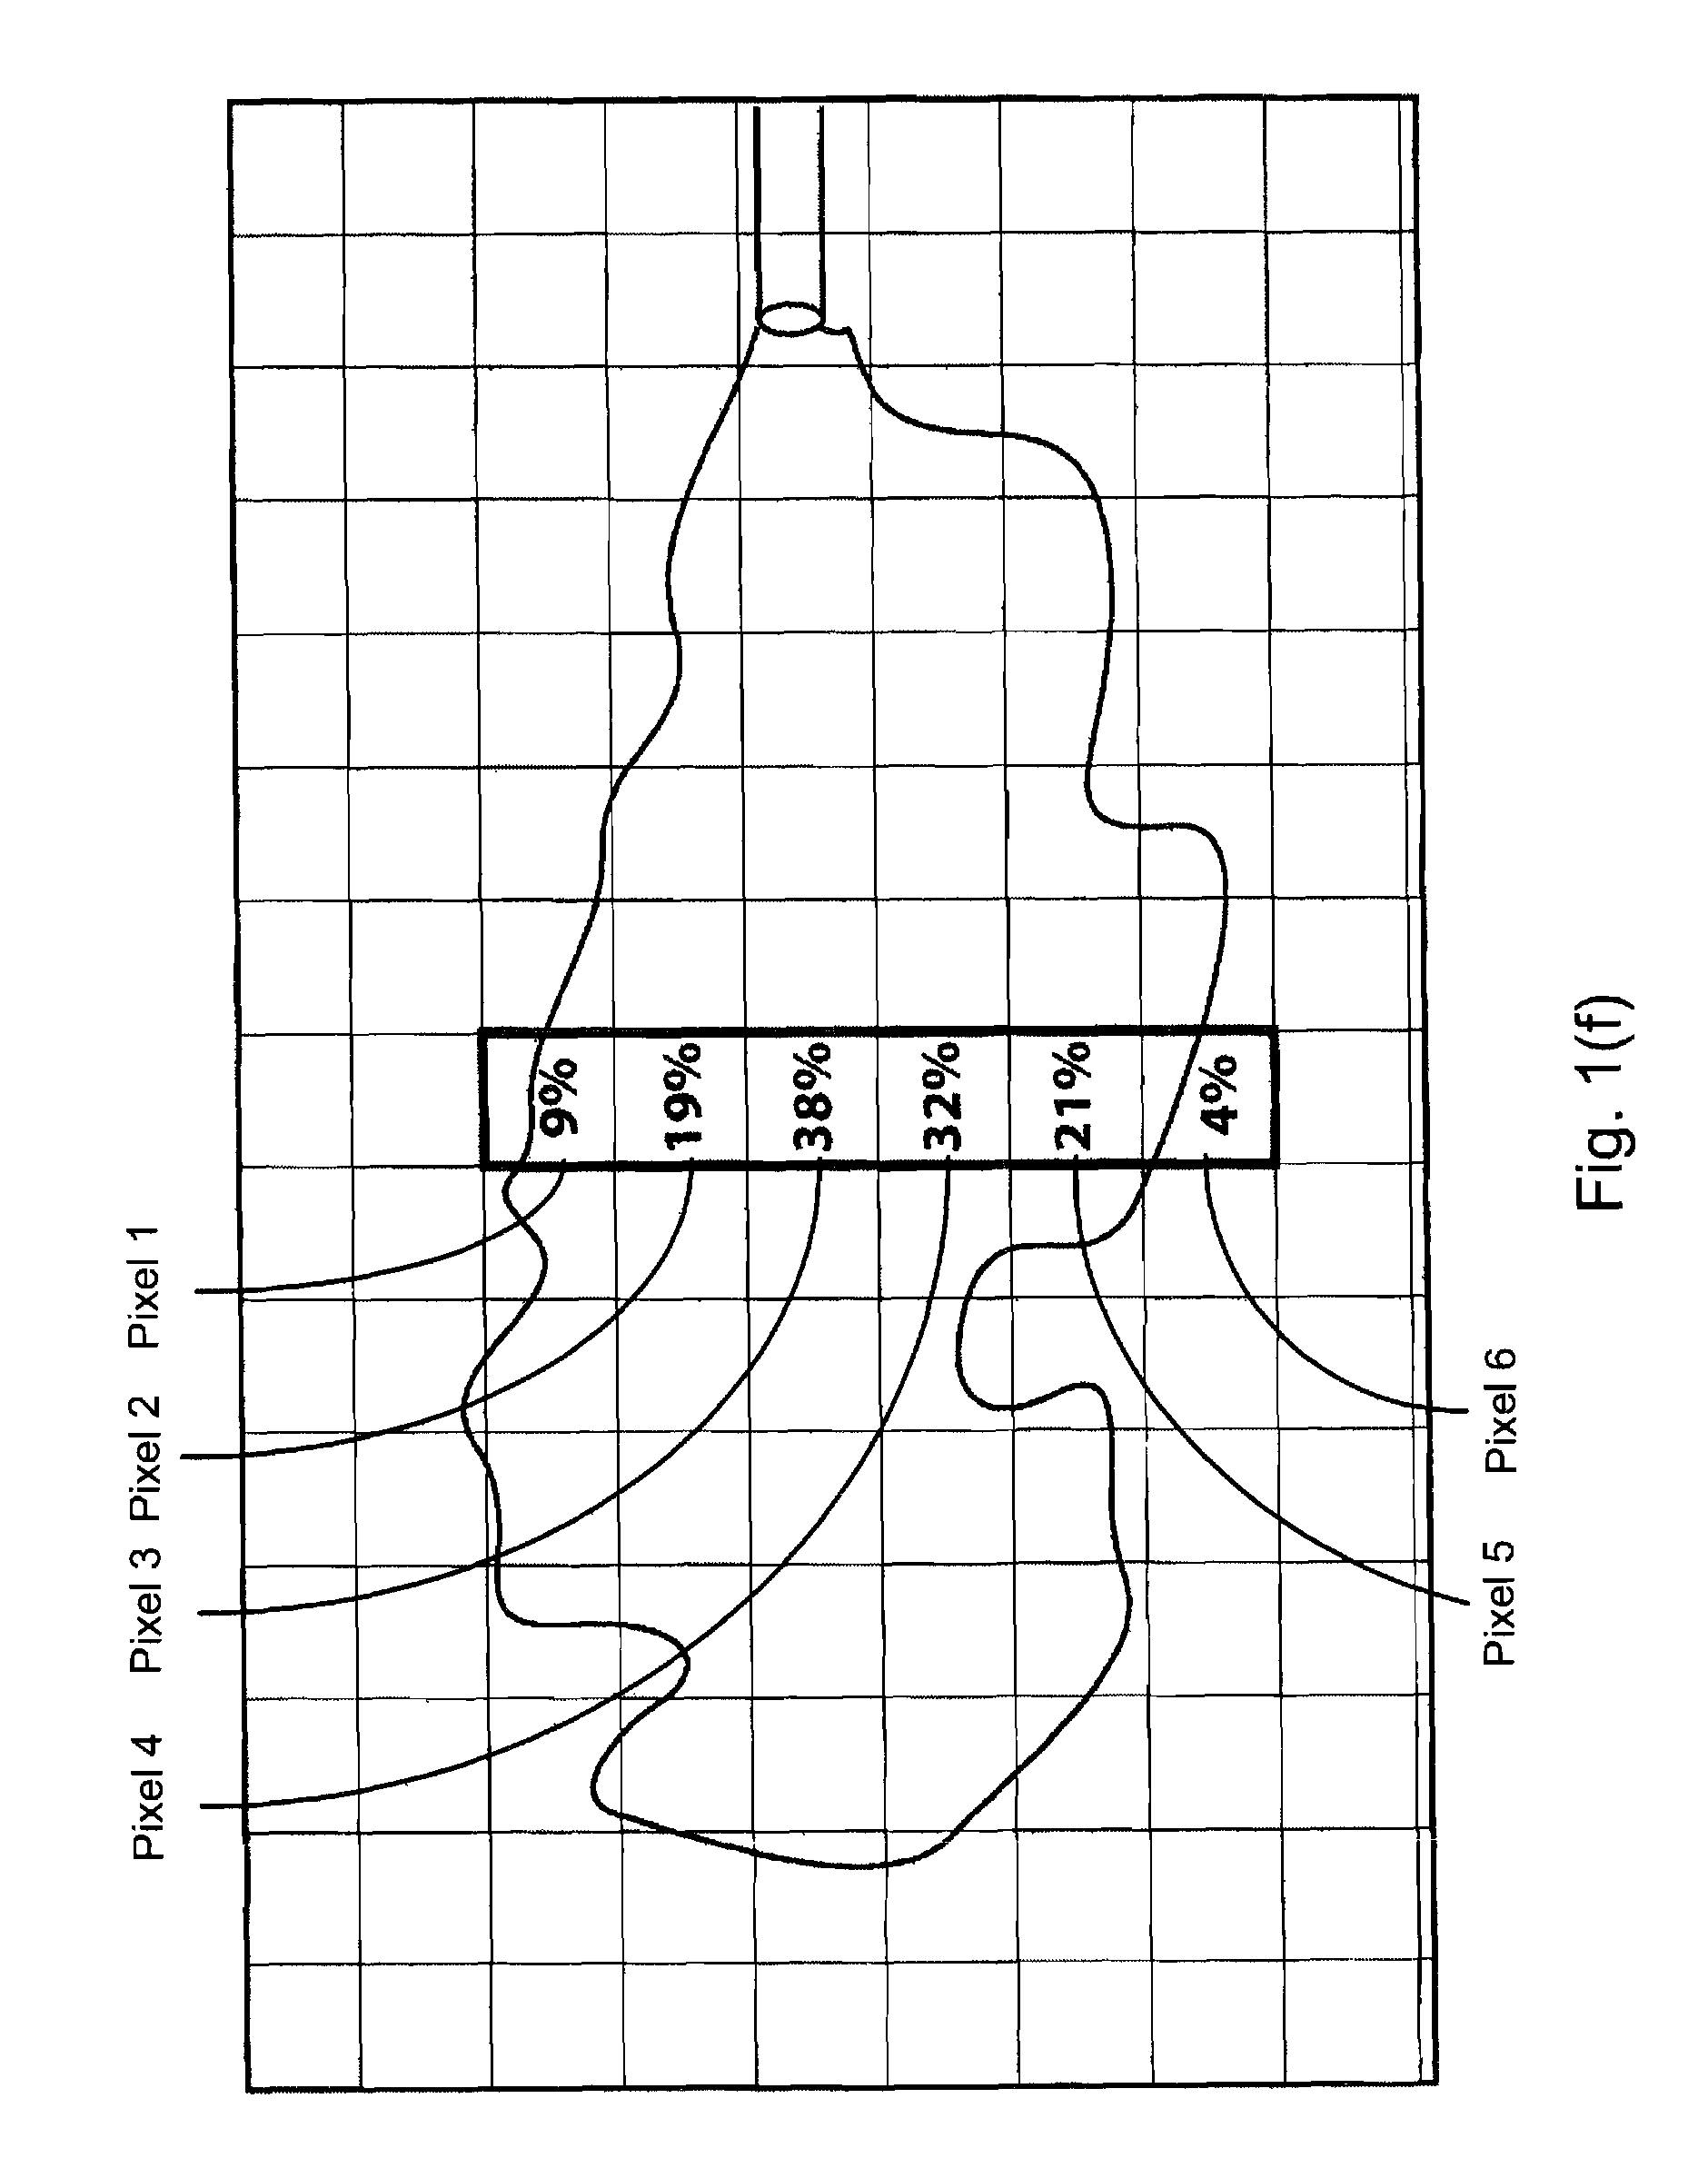 Device and method for quantification of gases in plumes by remote sensing